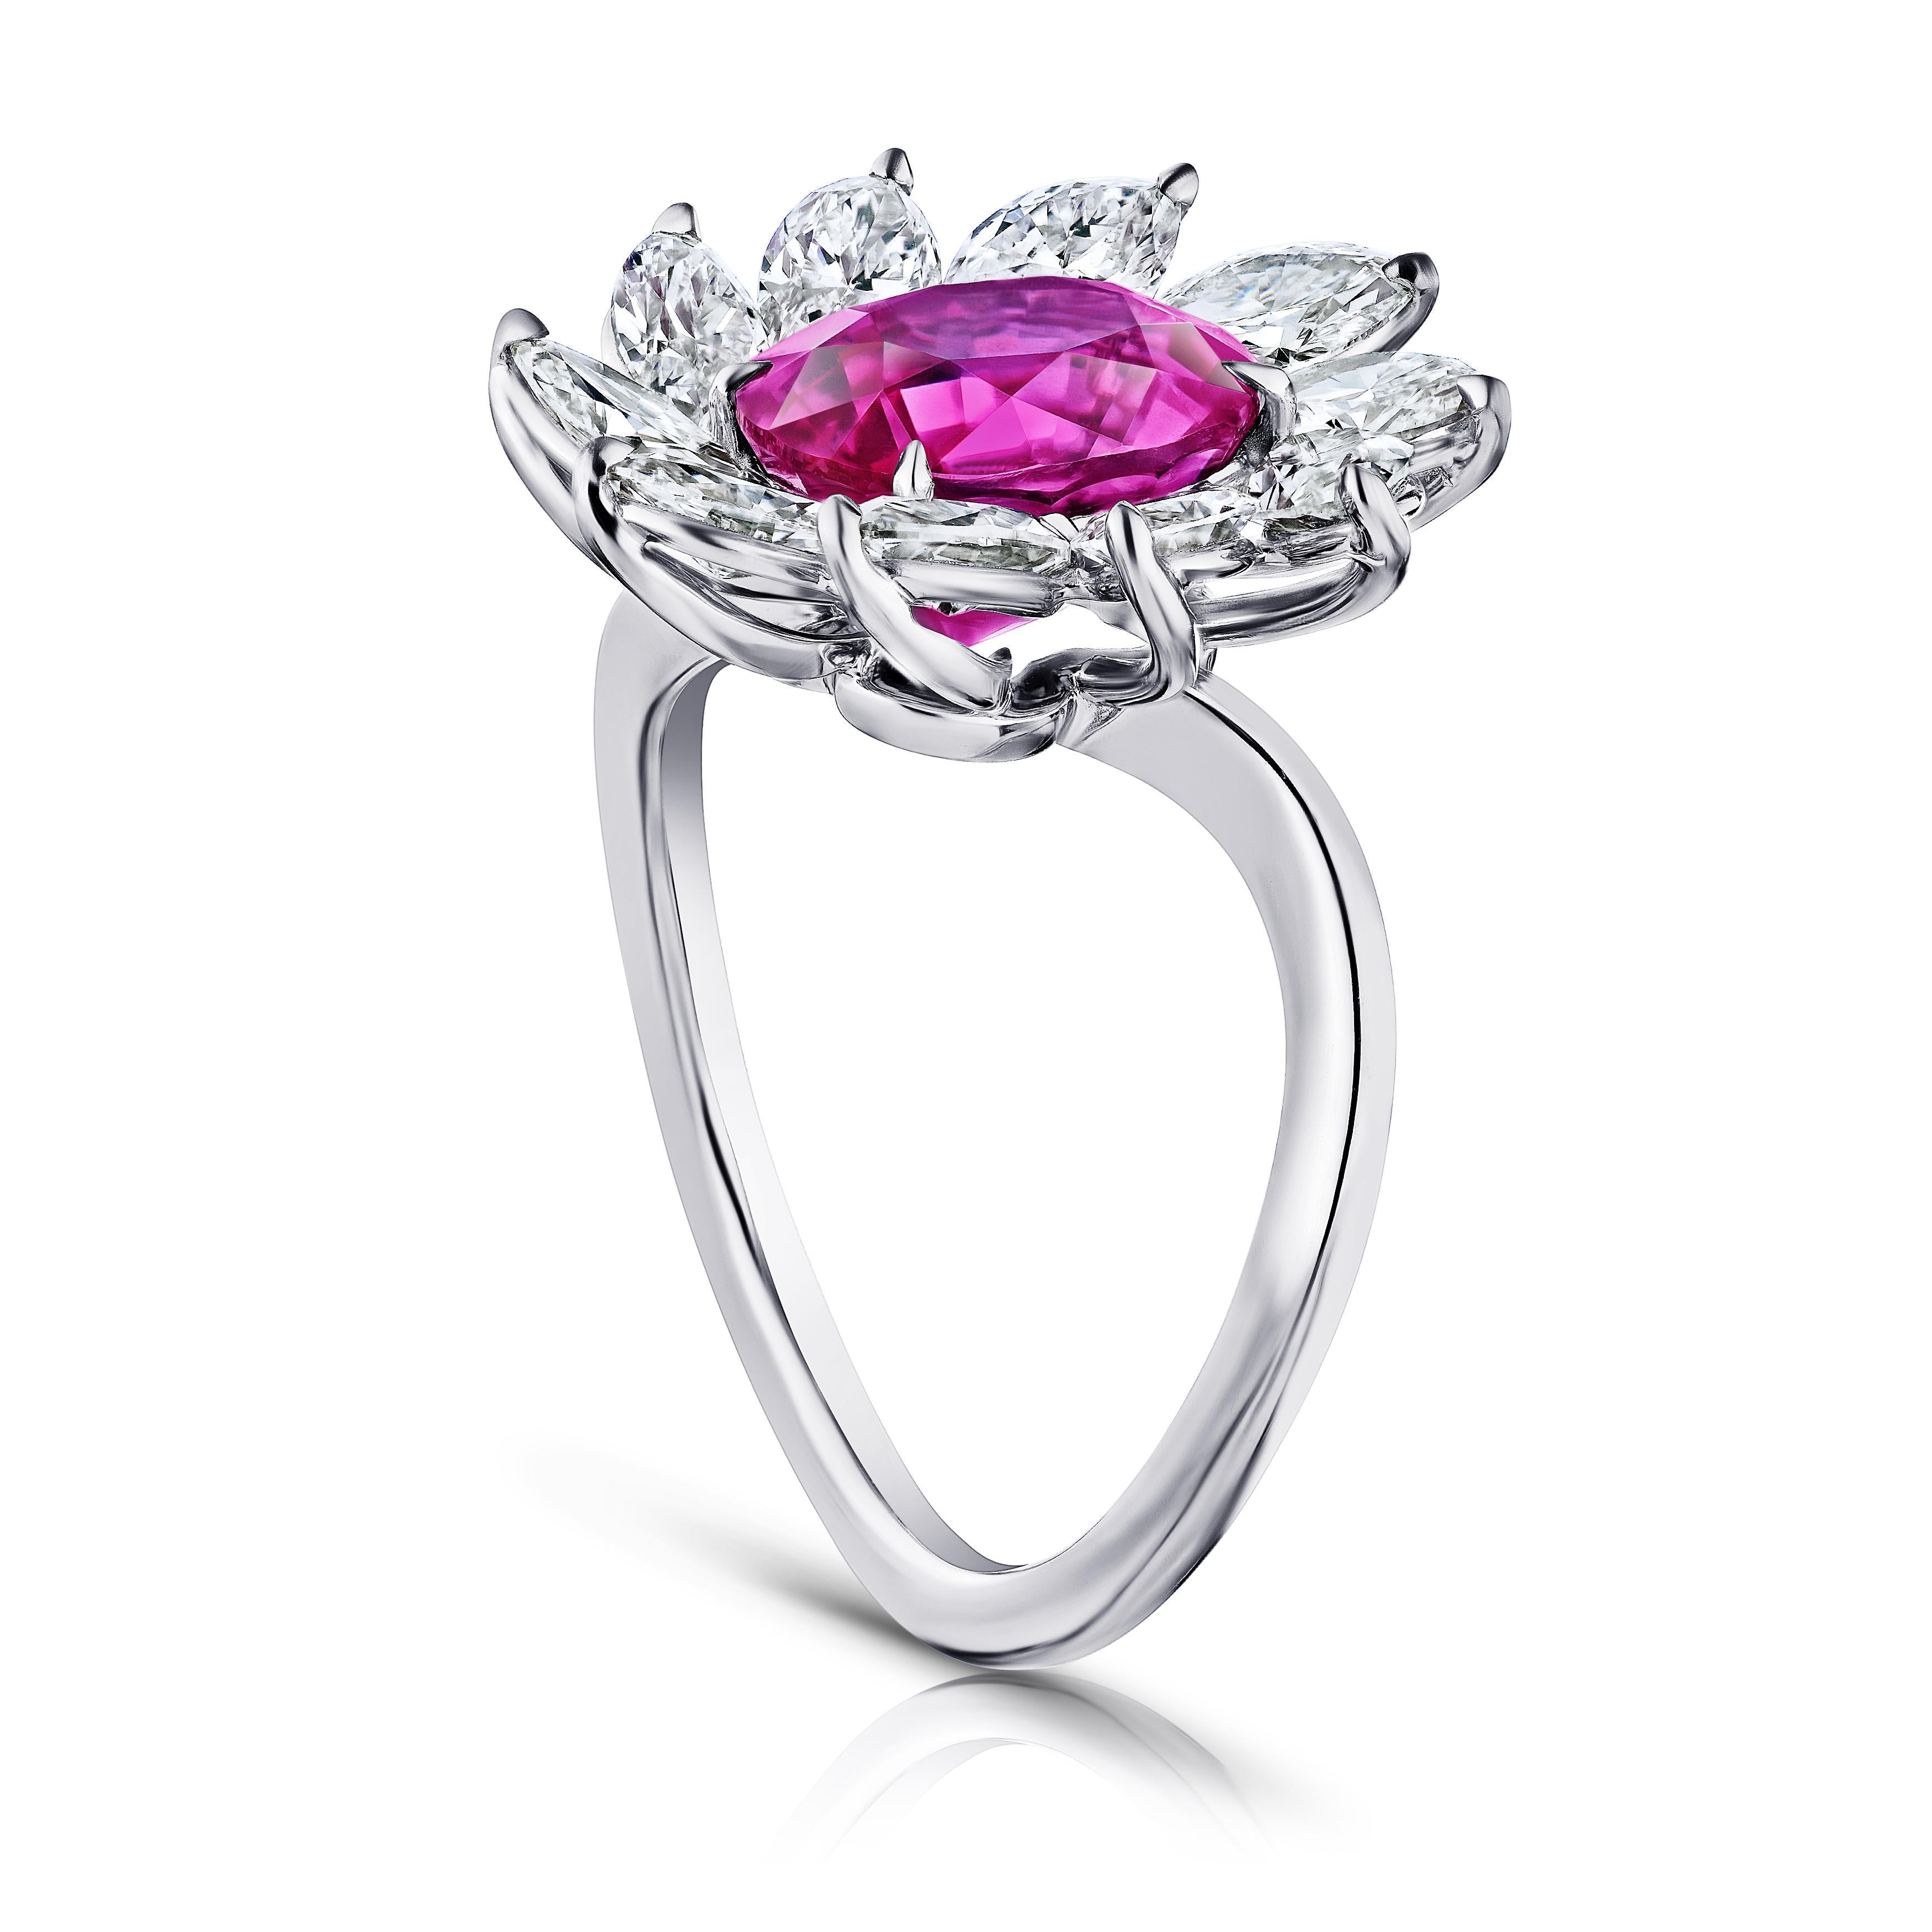 4.10 carat oval red ruby with ten marquise diamonds 2.18 carats set in a platinum hand made ring.